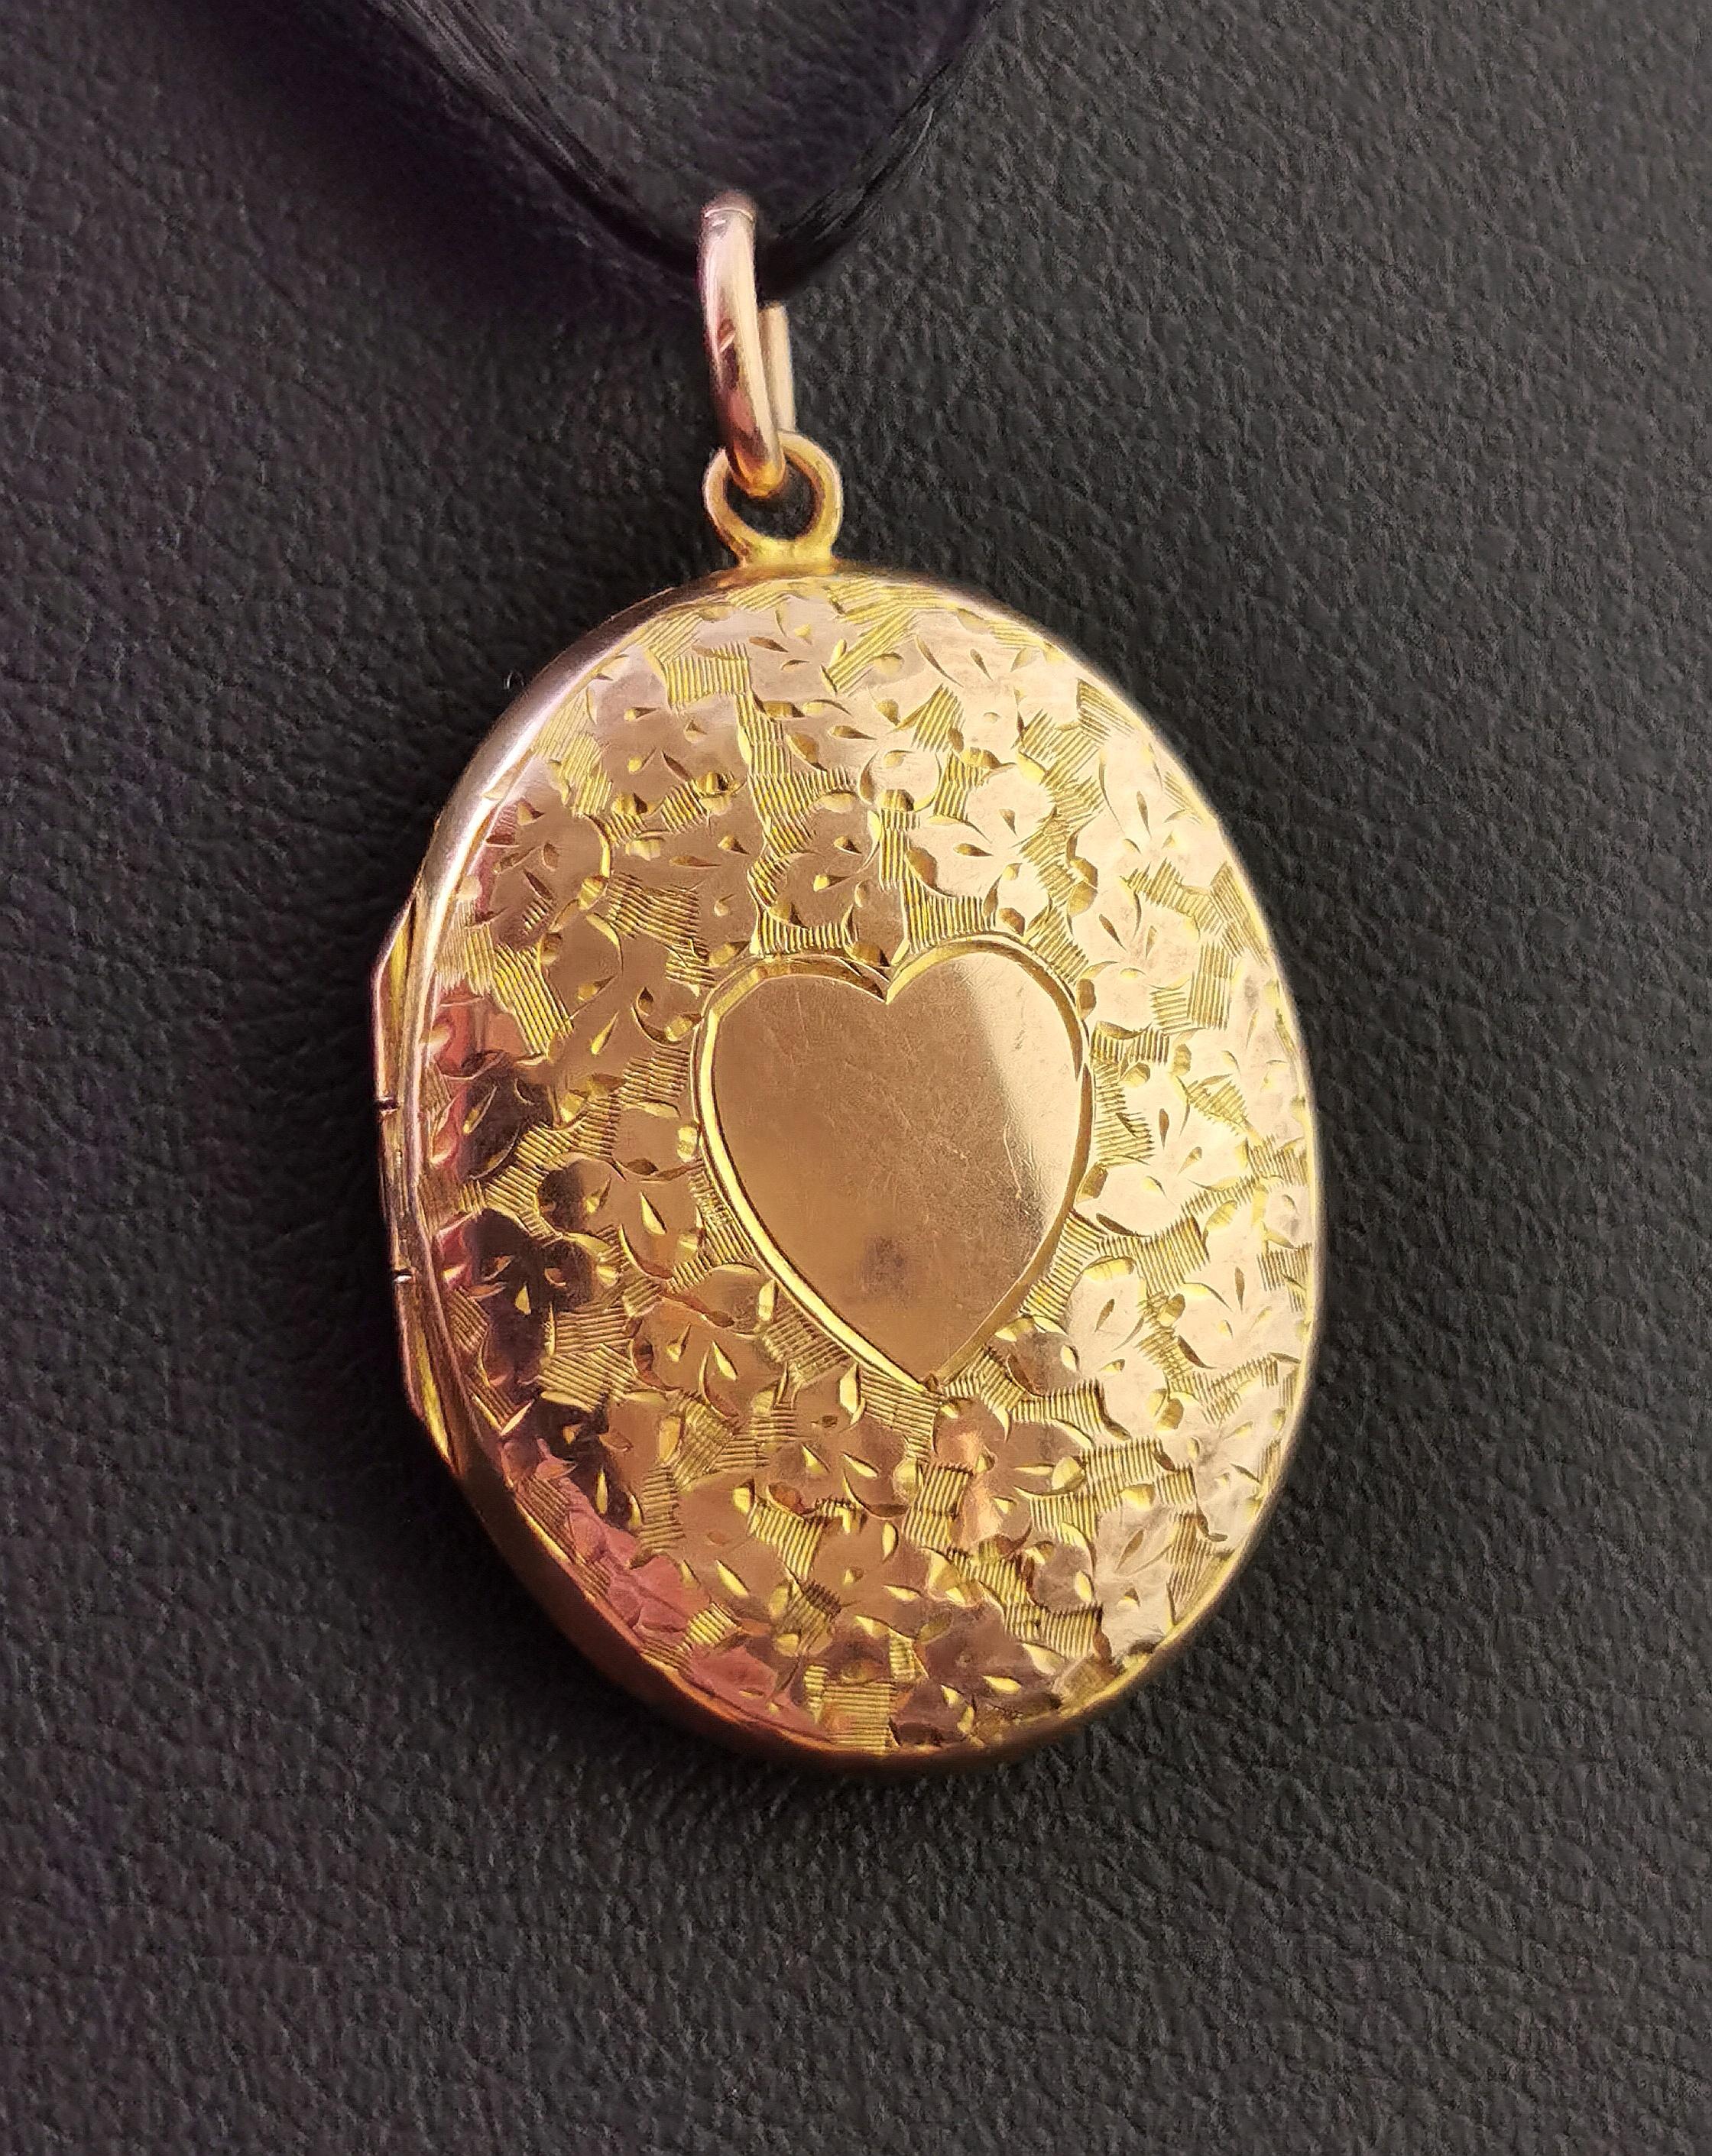 A very pretty antique 9kt Rose and yellow gold locket pendant.

This is a very finely detailed locket with an all over engraved design of trefoil shaped leaves, the front features a sweet heart shaped cartouche which has not been engraved so could